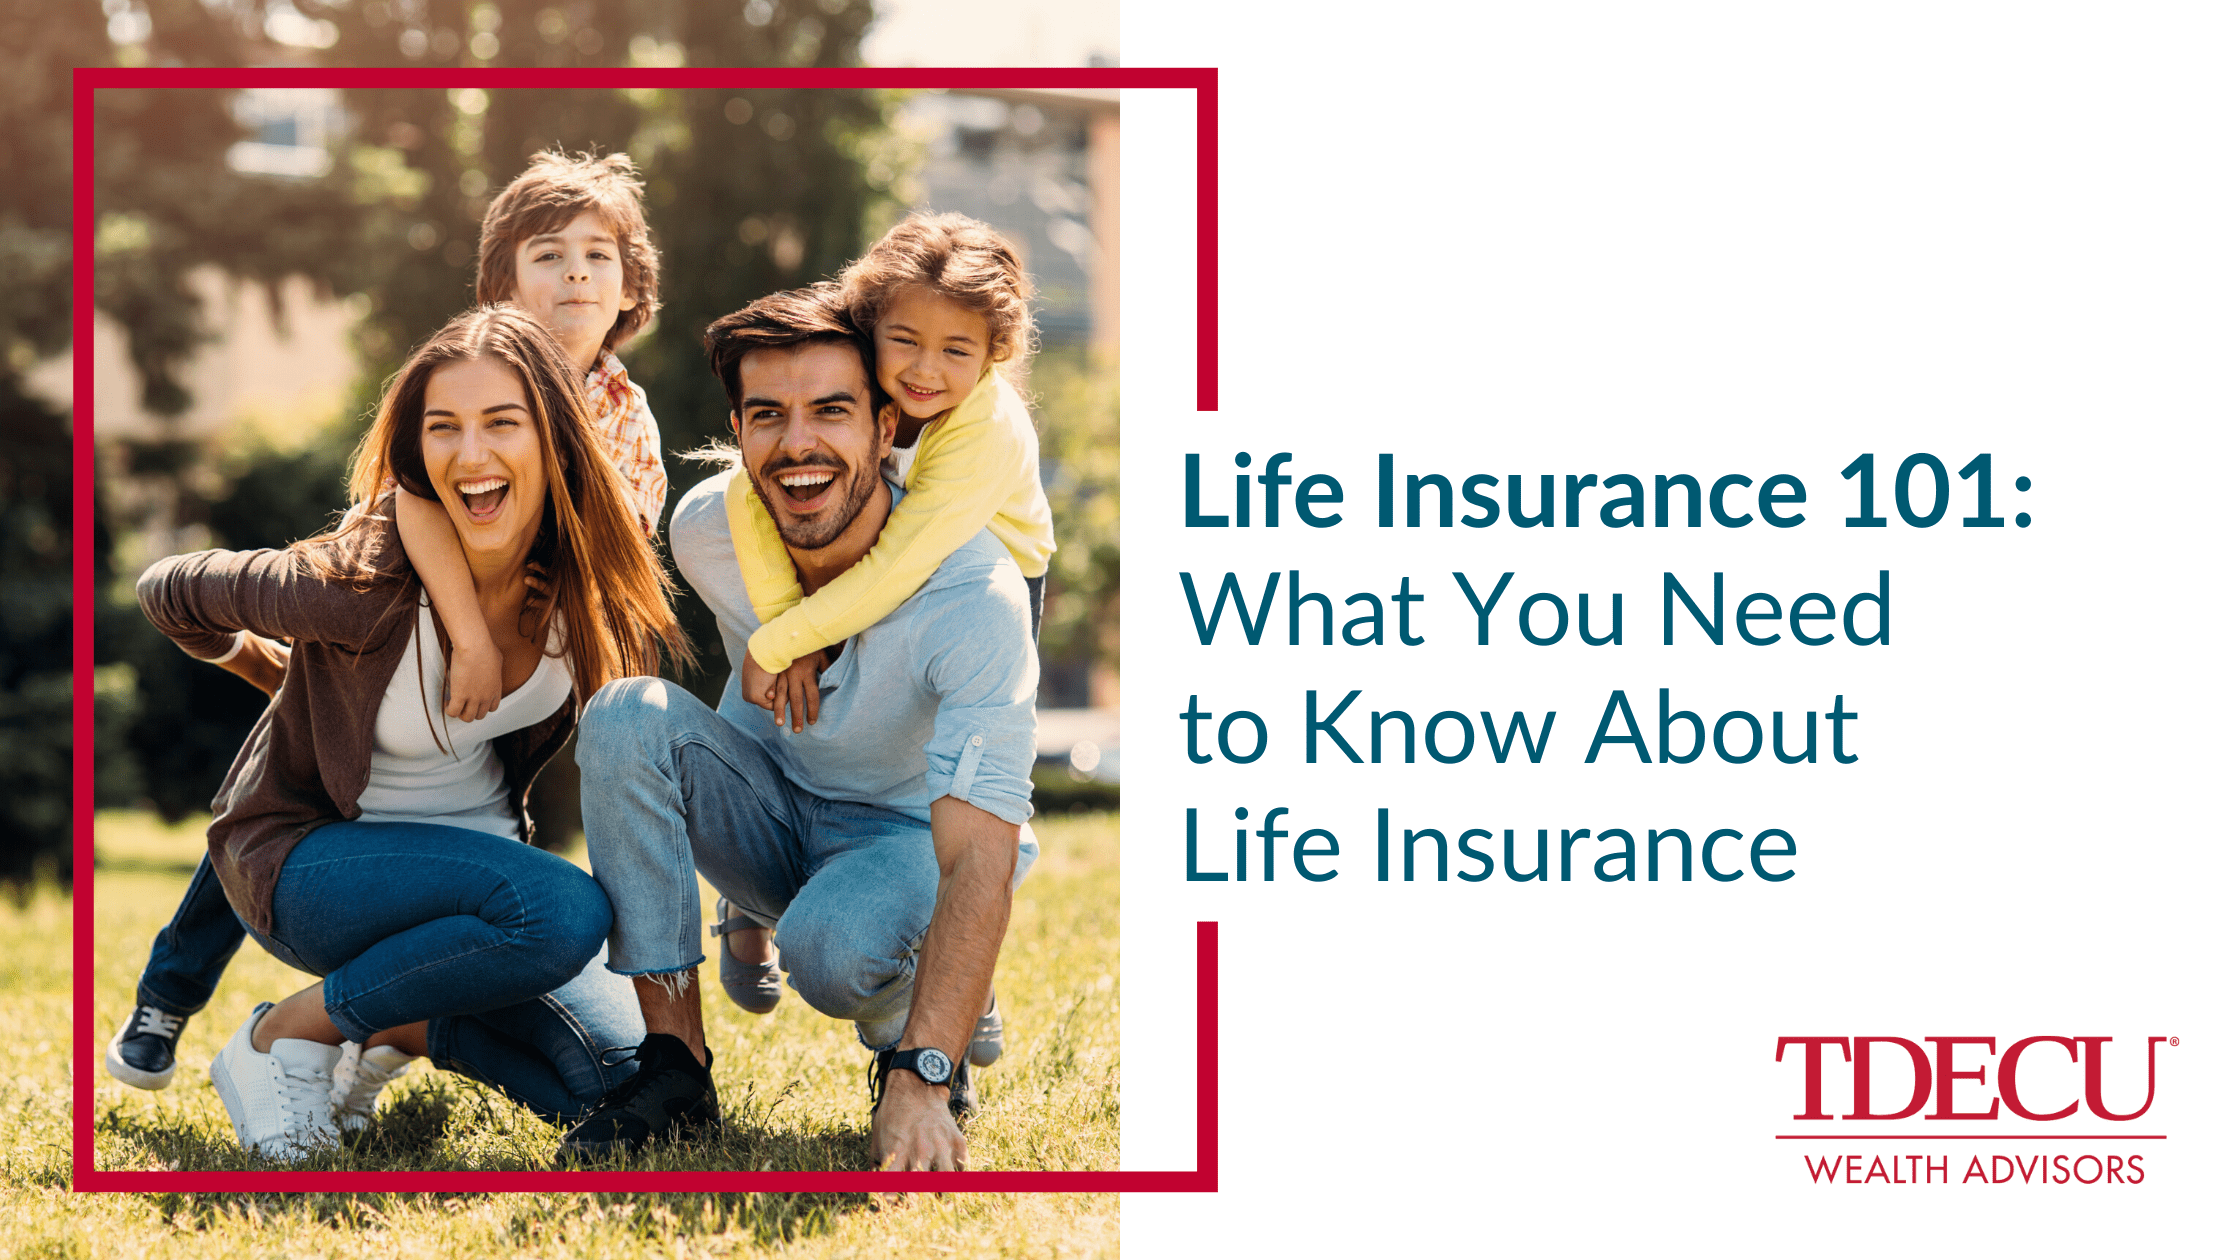 Life Insurance 101: What You Need to Know About Life Insurance